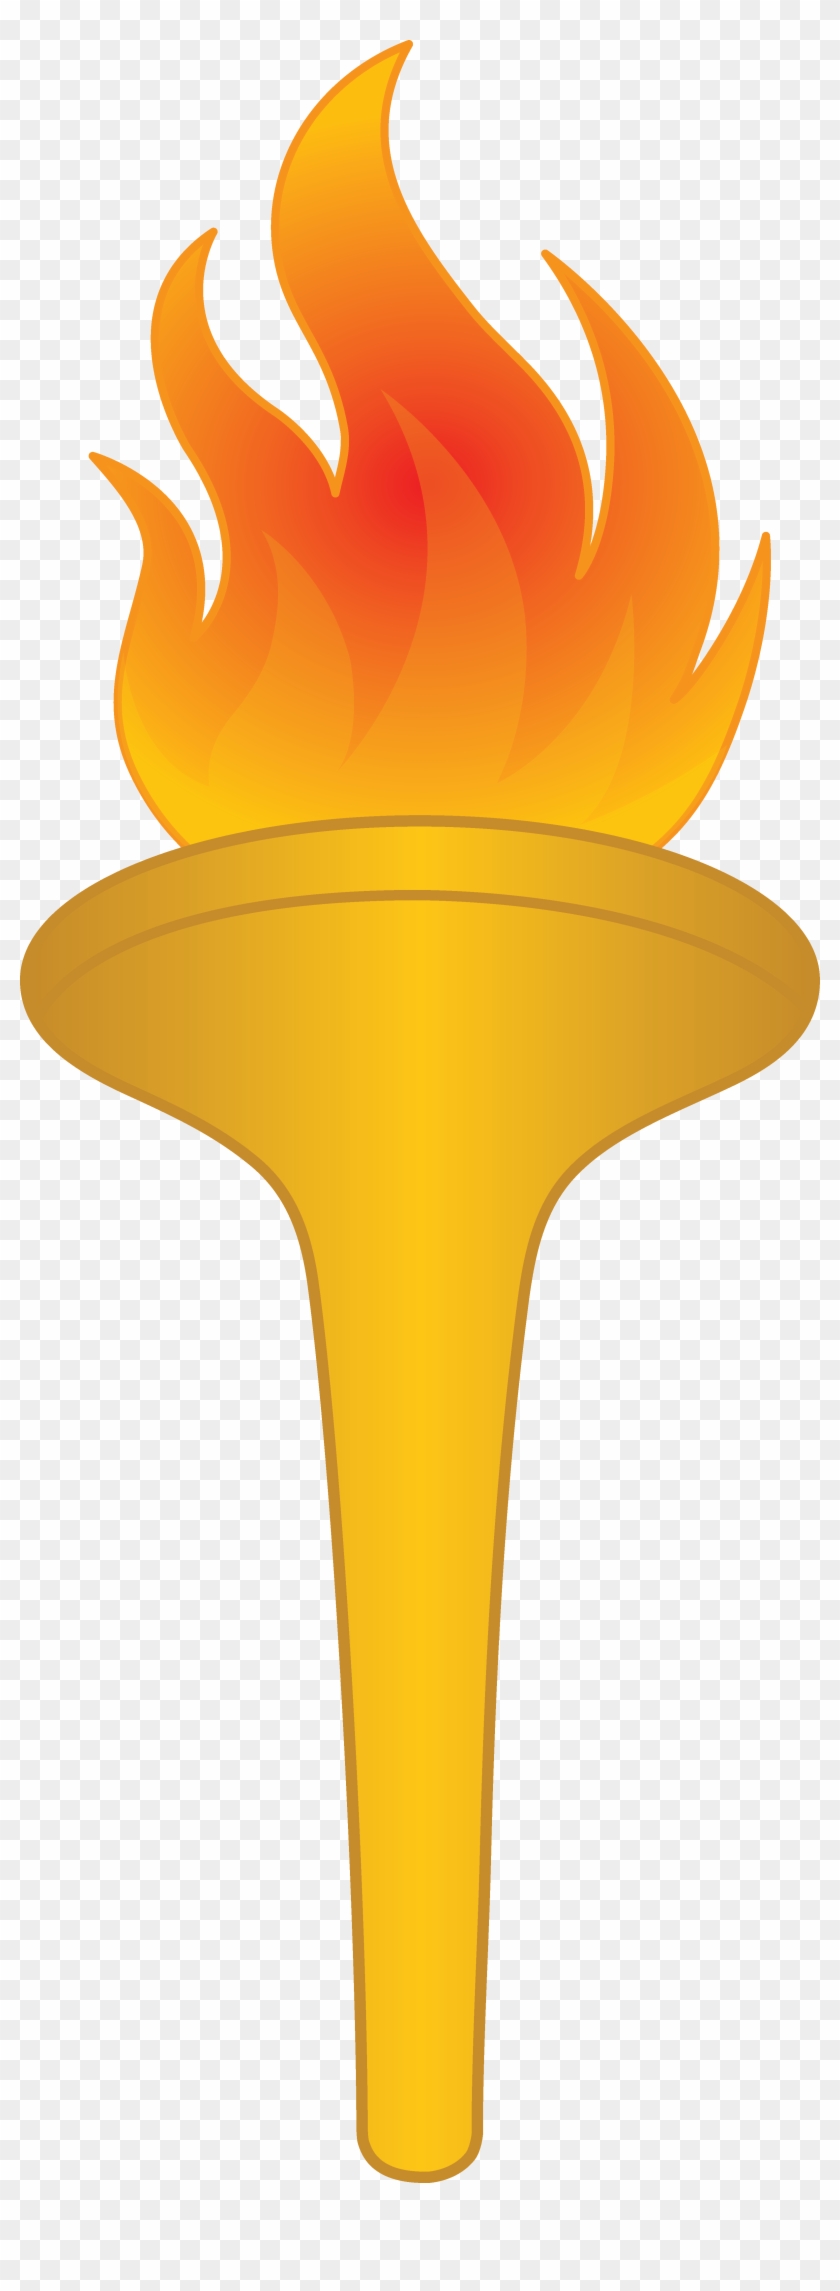 Olympic Torch Png Image - Winter Olympic Torch Clipart #189693